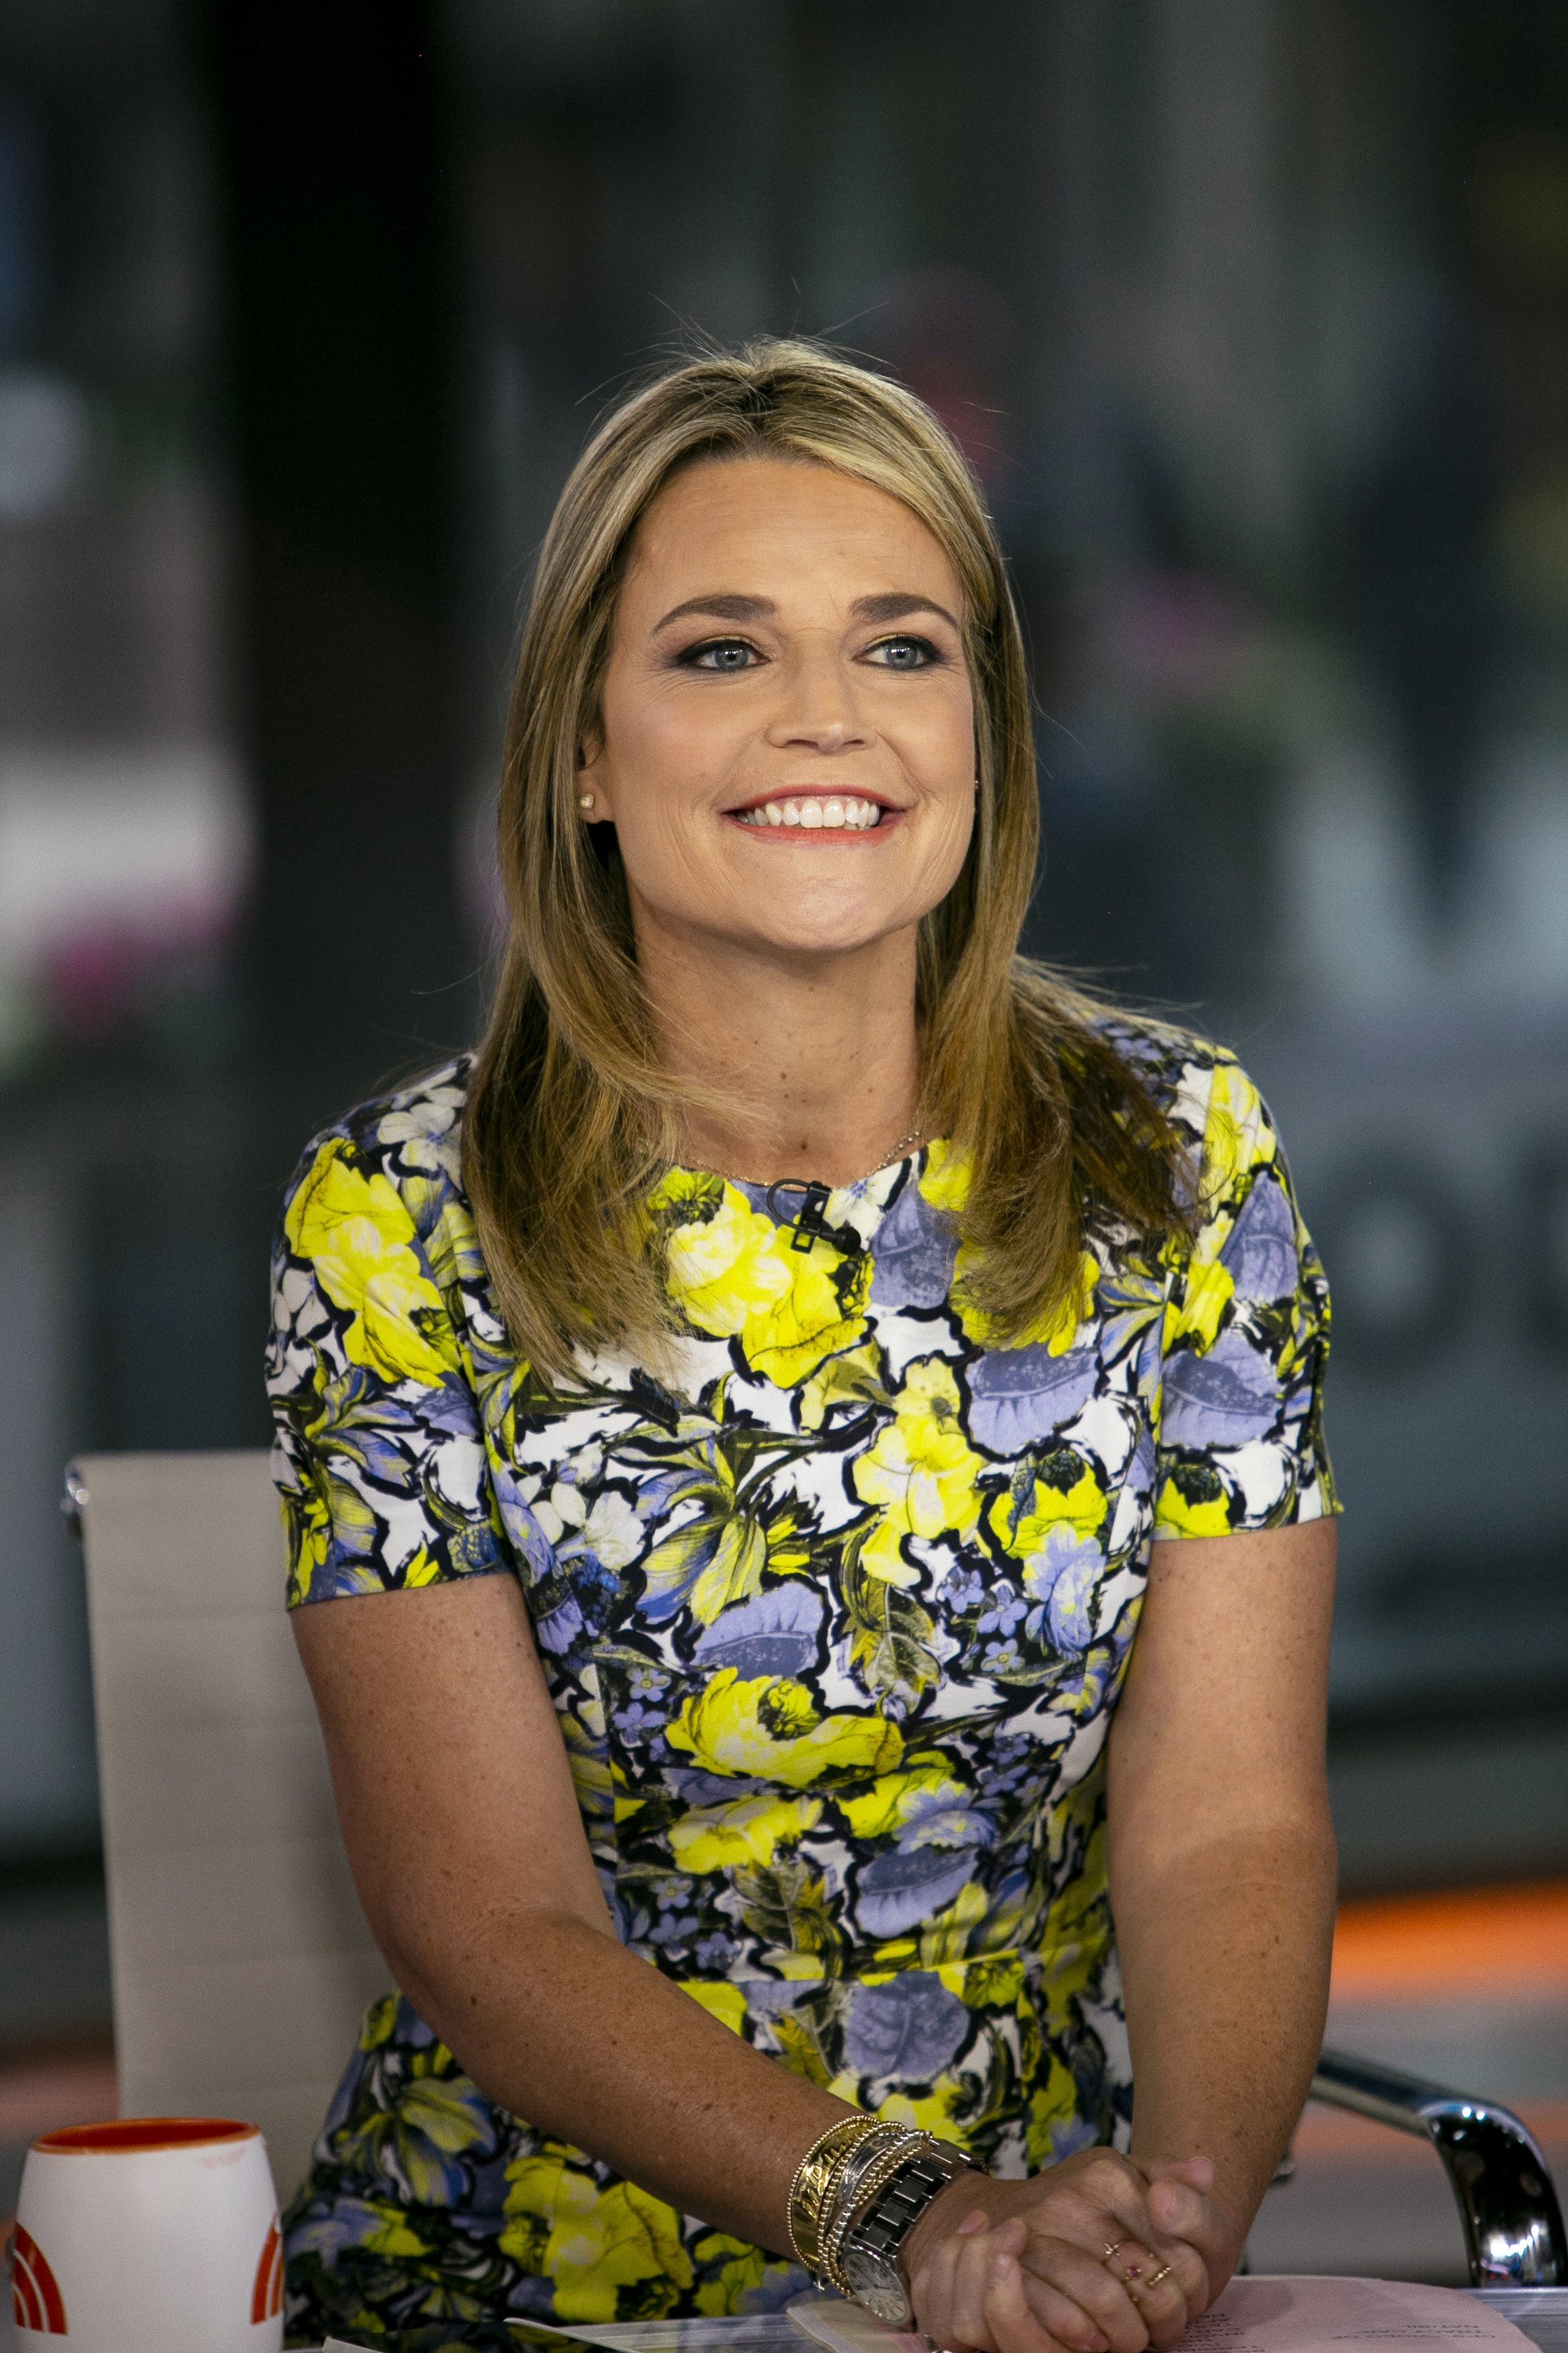 Savannah Guthrie on the "Today" show in 2019. | Photo: Getty Images